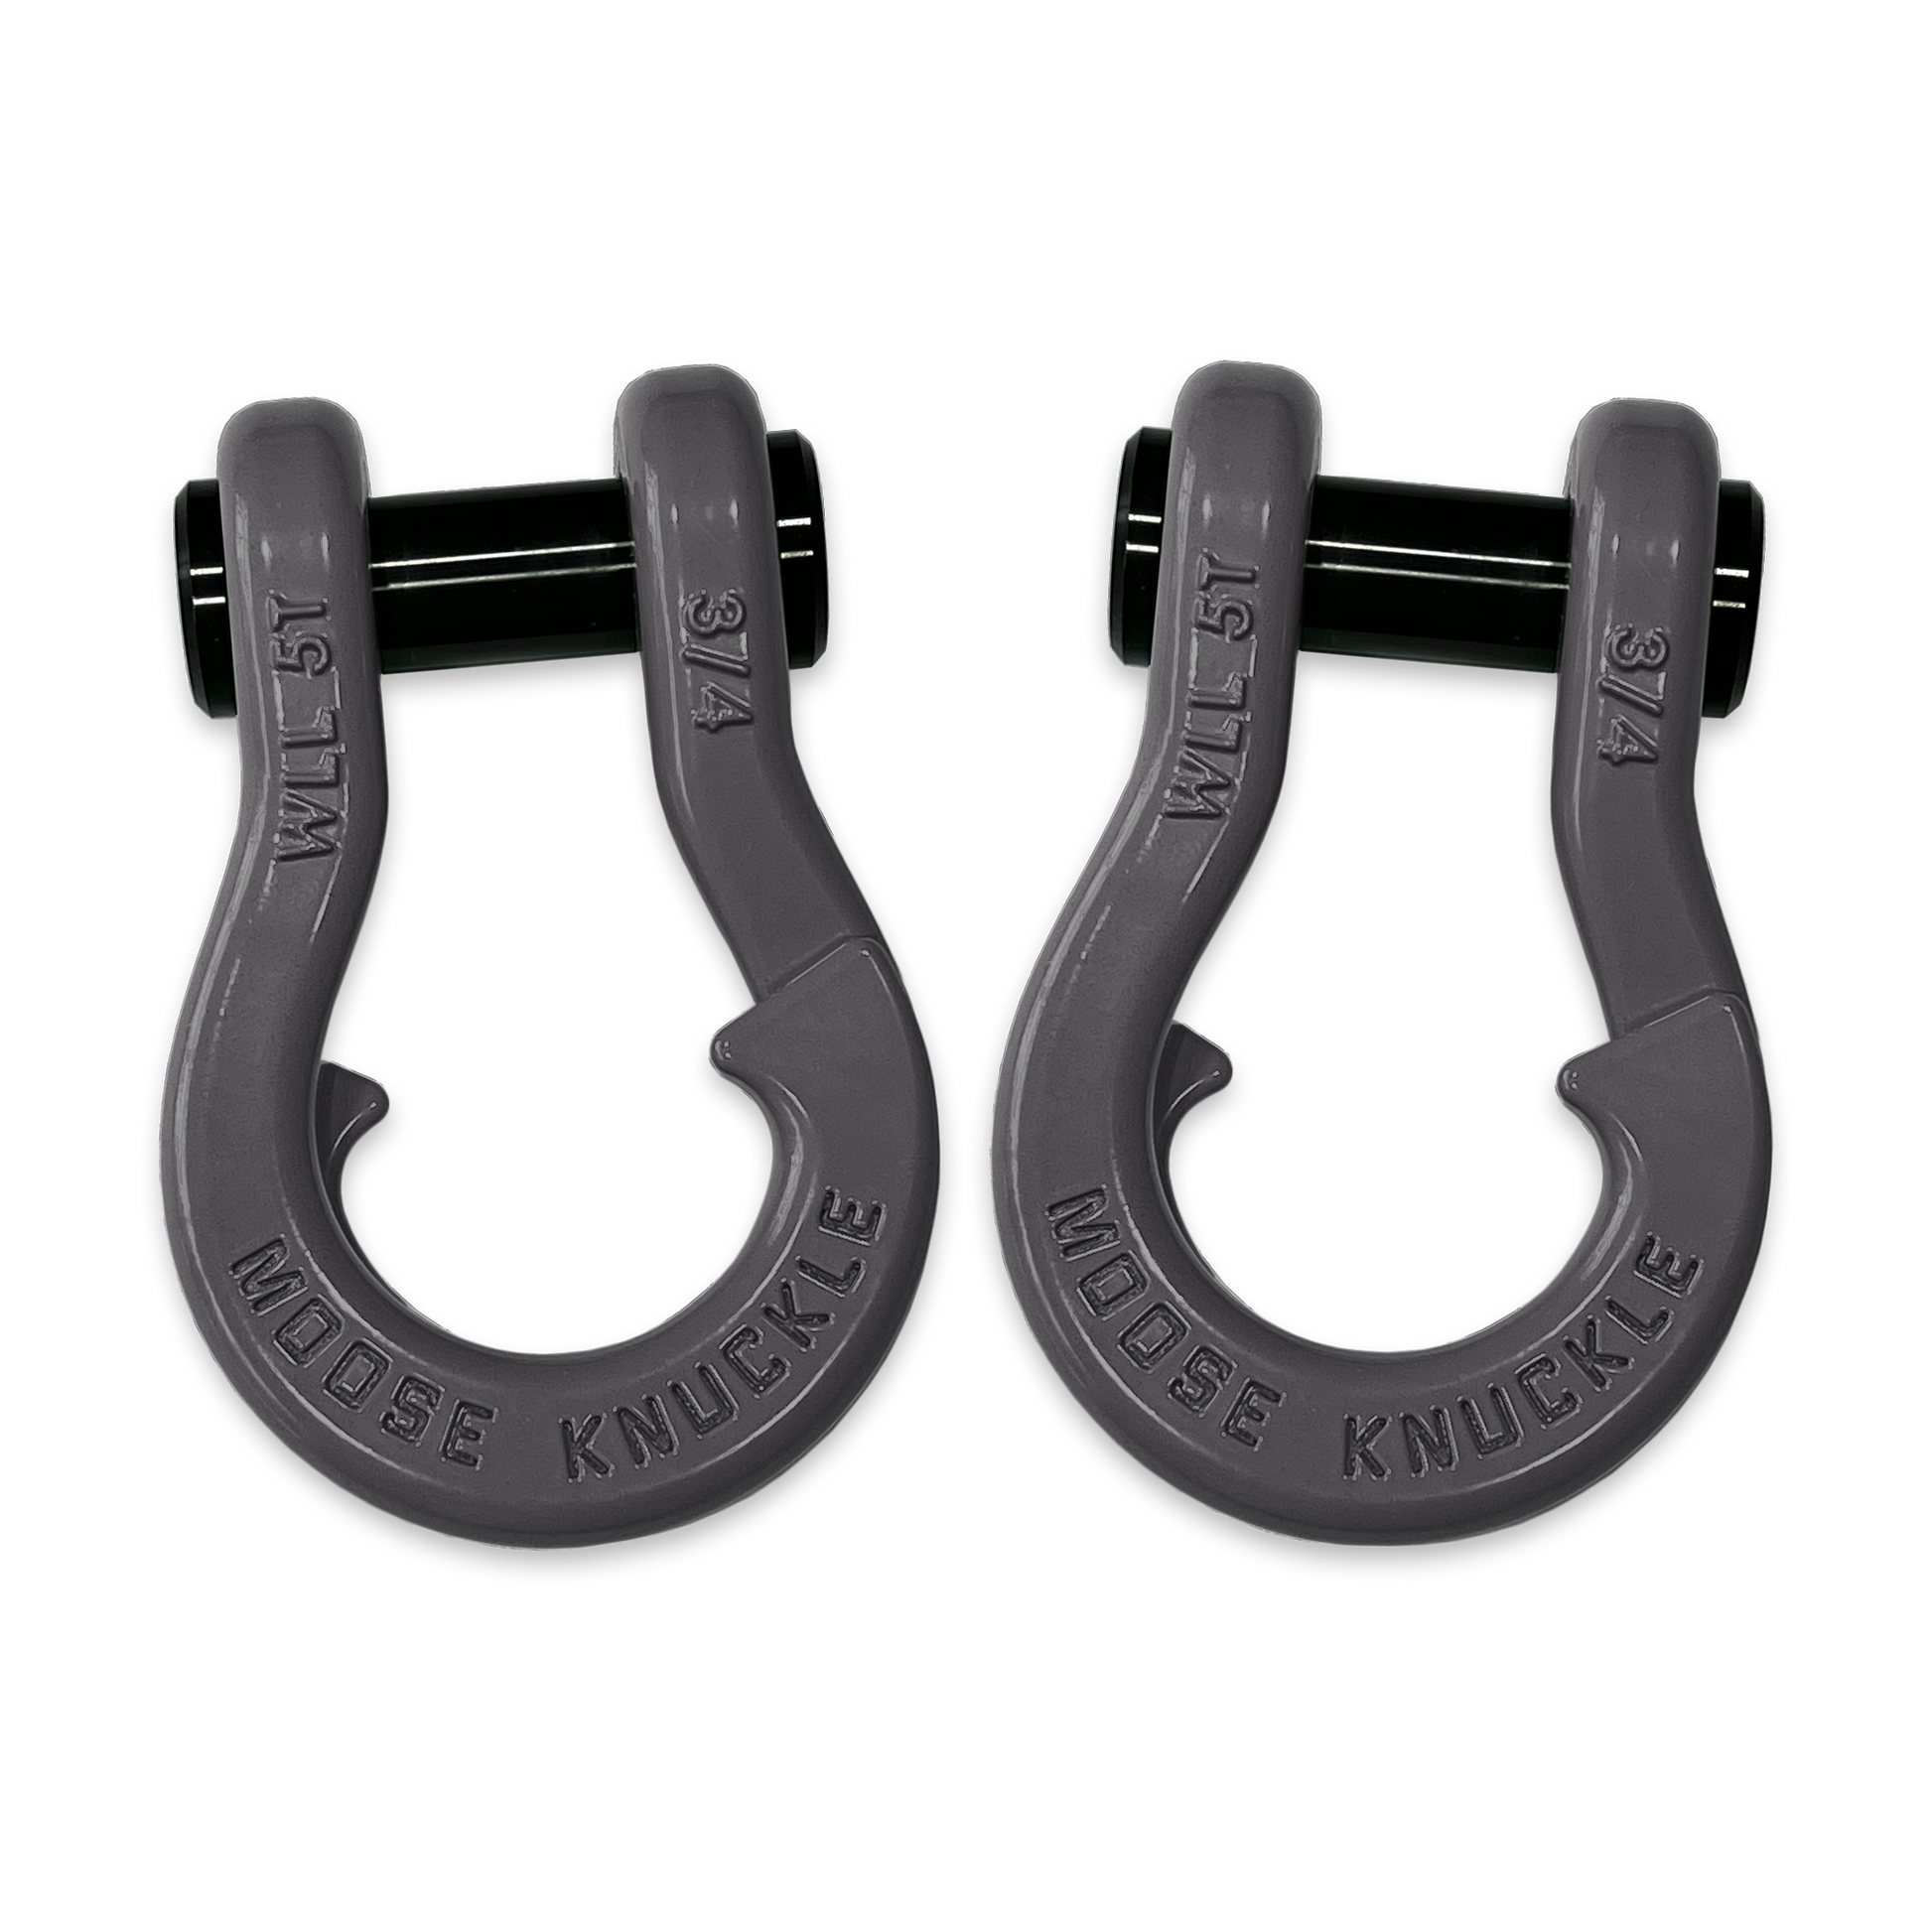 Moose Knuckle's Jowl Recovery Split Shackle 3/4 in Gun Gray and Gun Gray Combo